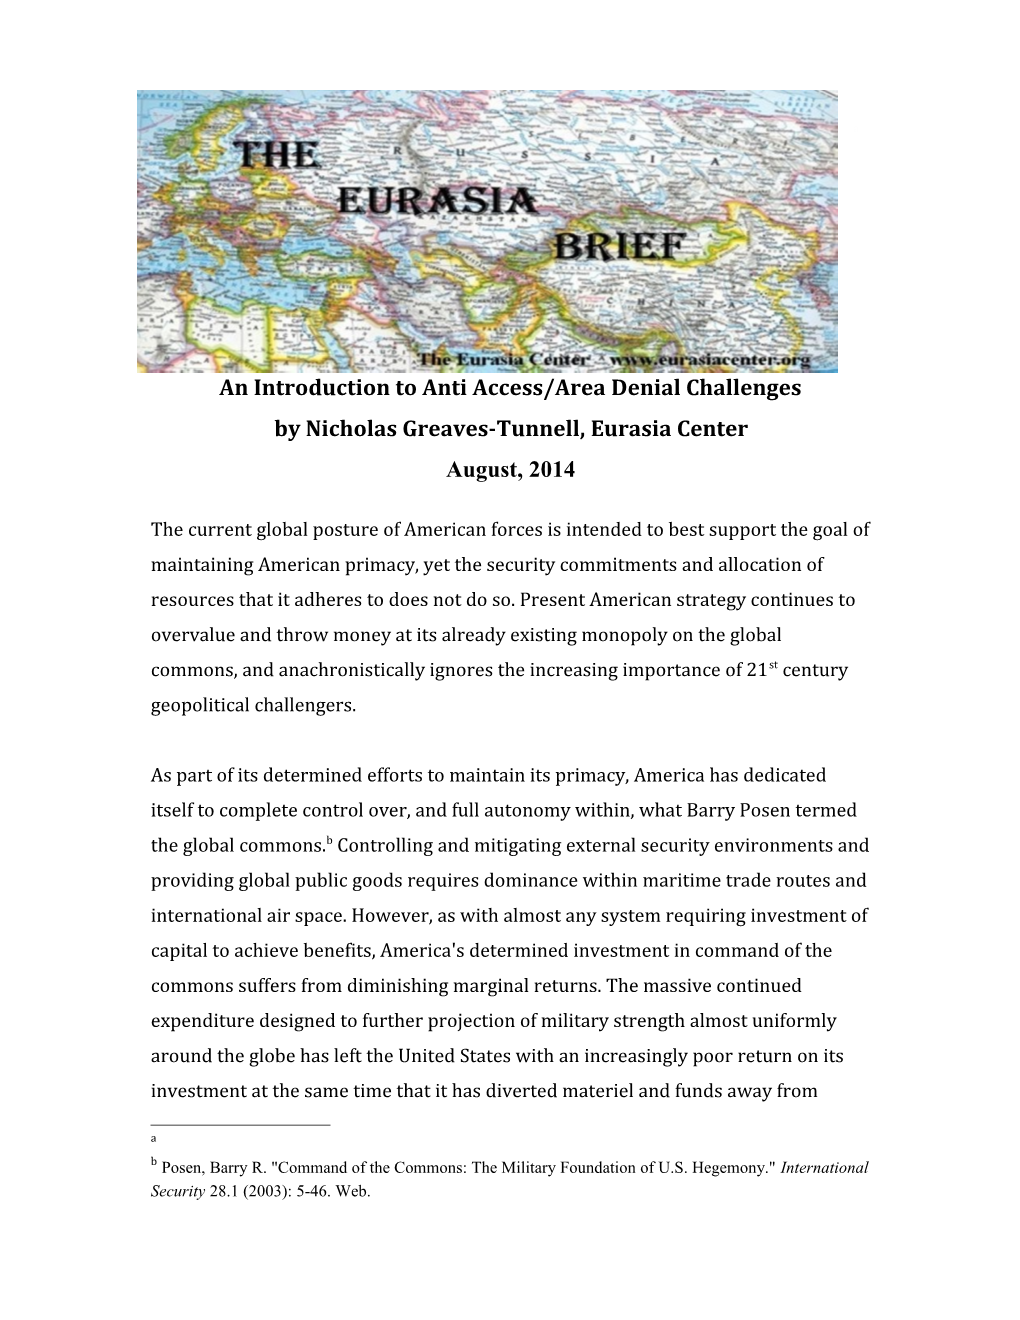 By Nicholas Greaves-Tunnell, Eurasia Center